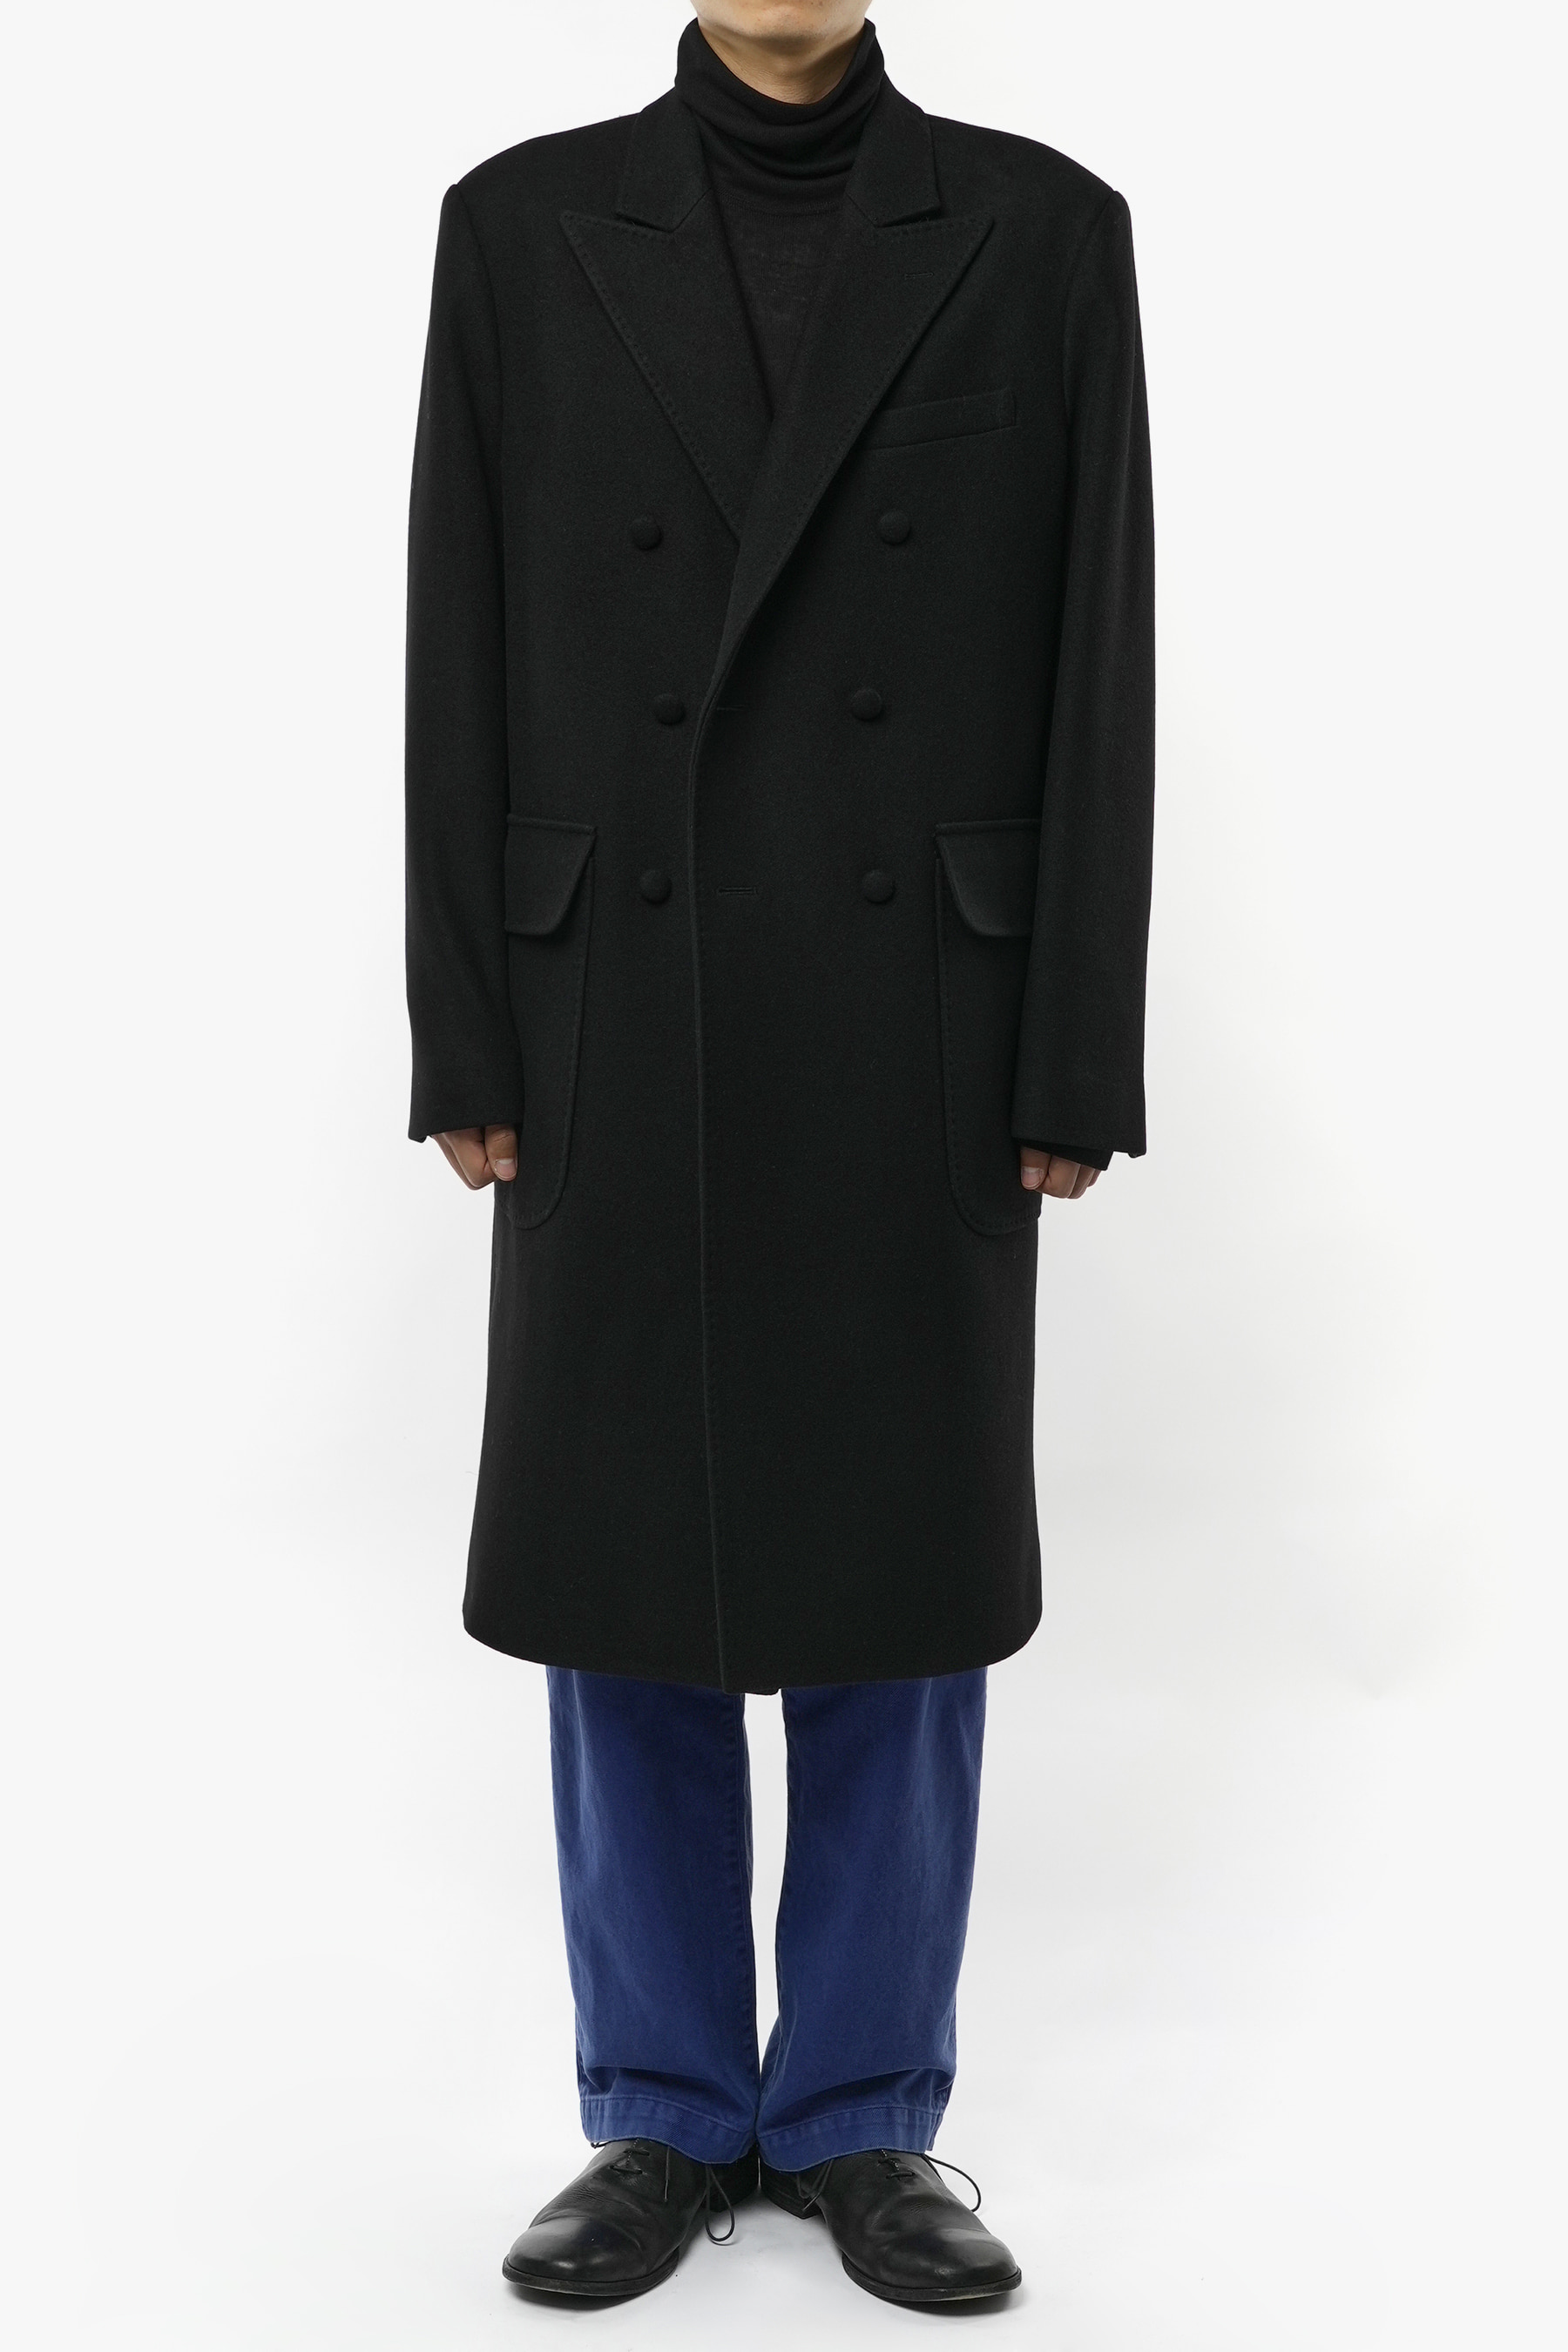 BLACK TIMELEAP MELTON WOOL DOUBLE BREASTED COAT